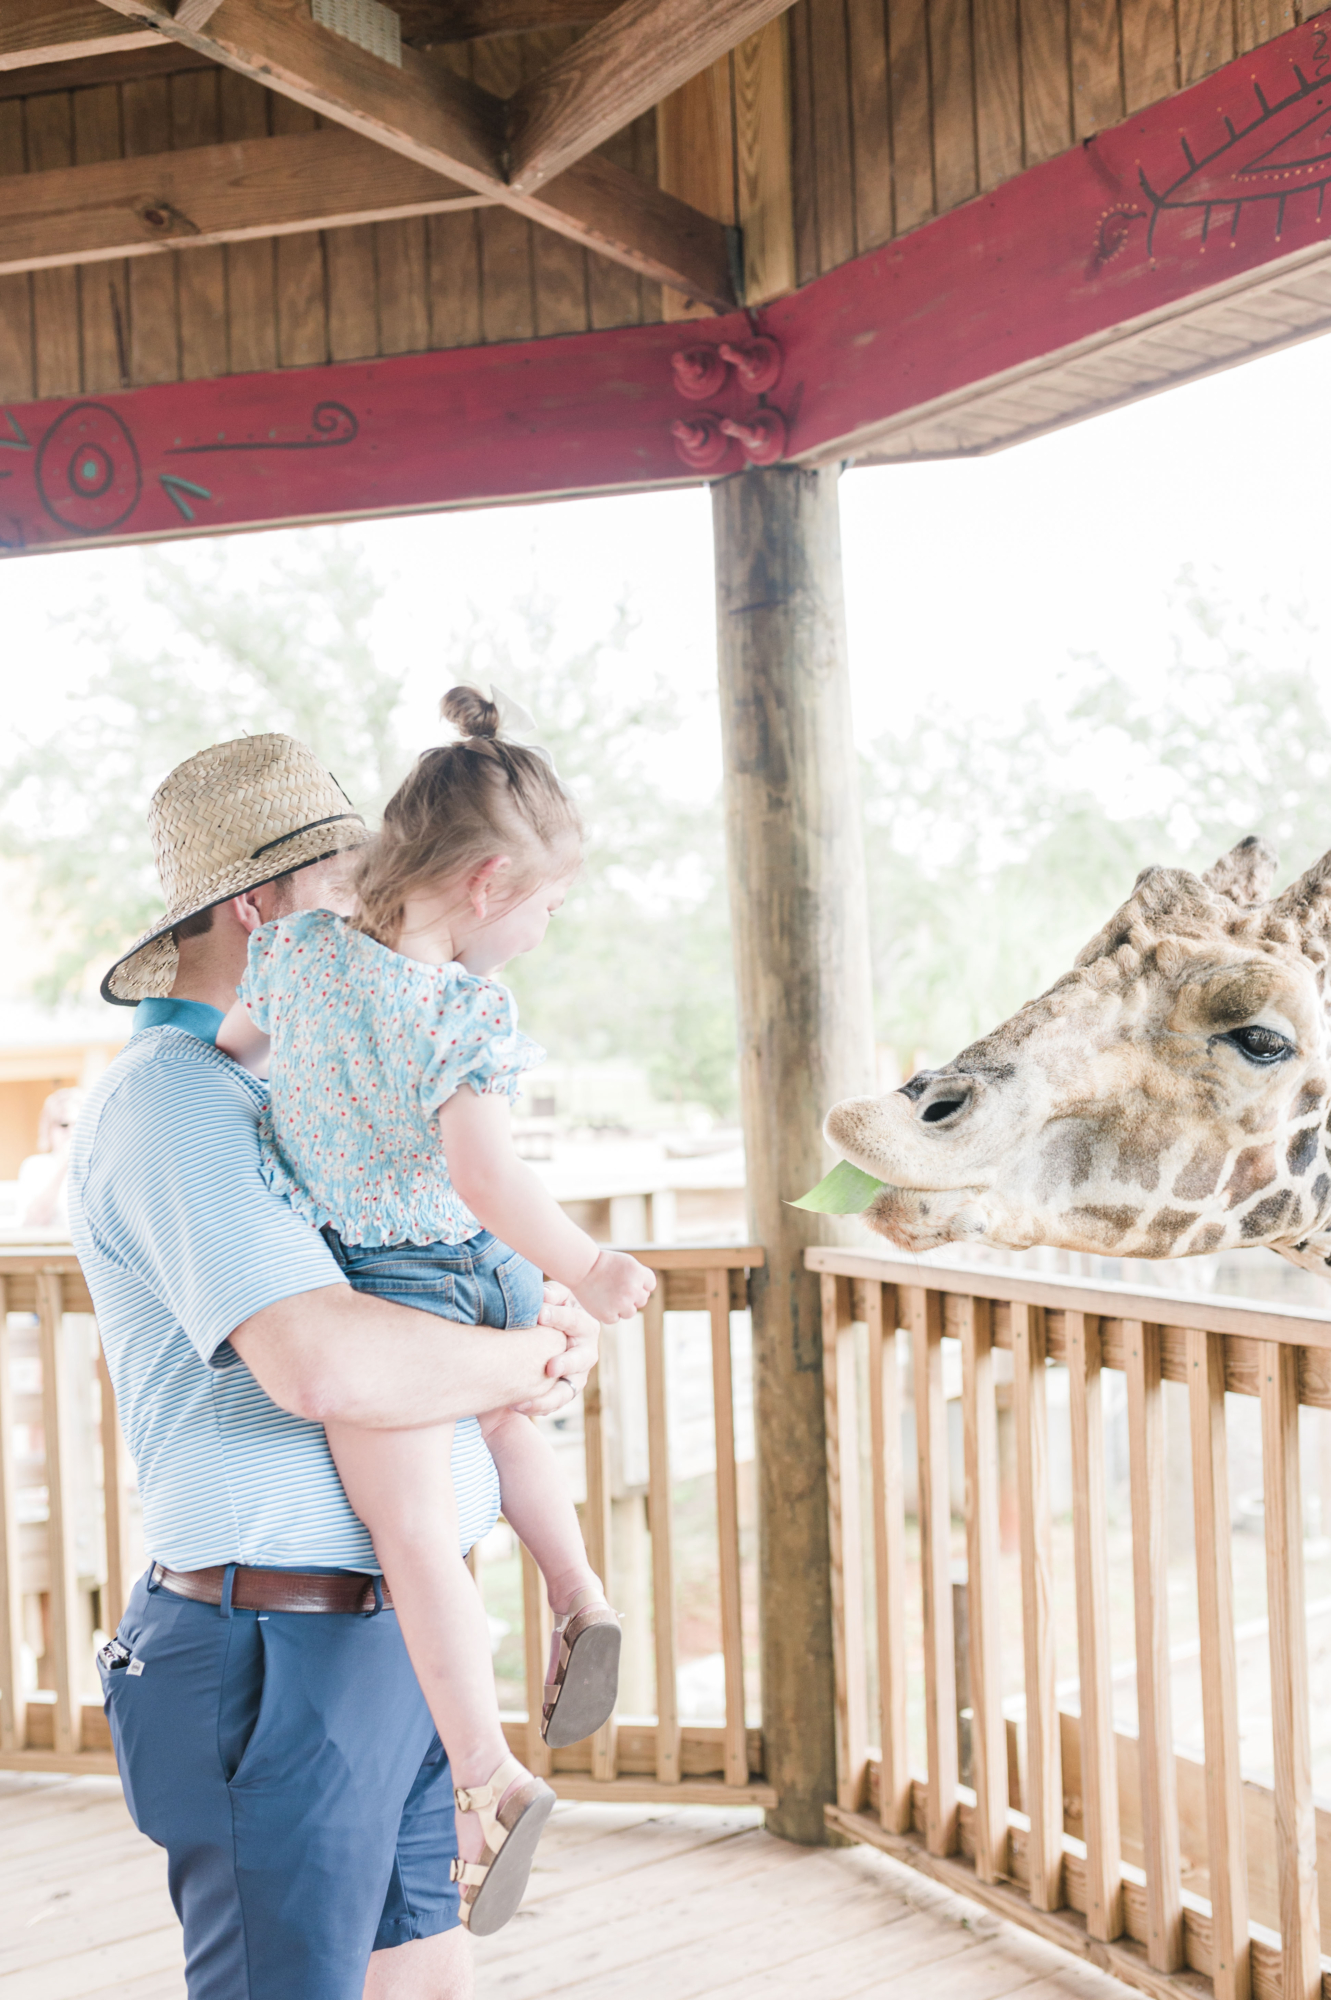 John Naylor holding daughter as they feed a giraffe at the Alabama Gulf Coast Zoo in Gulf Shores, Alabama--week in Gulf Shores, Alabama, backwards beach day activities